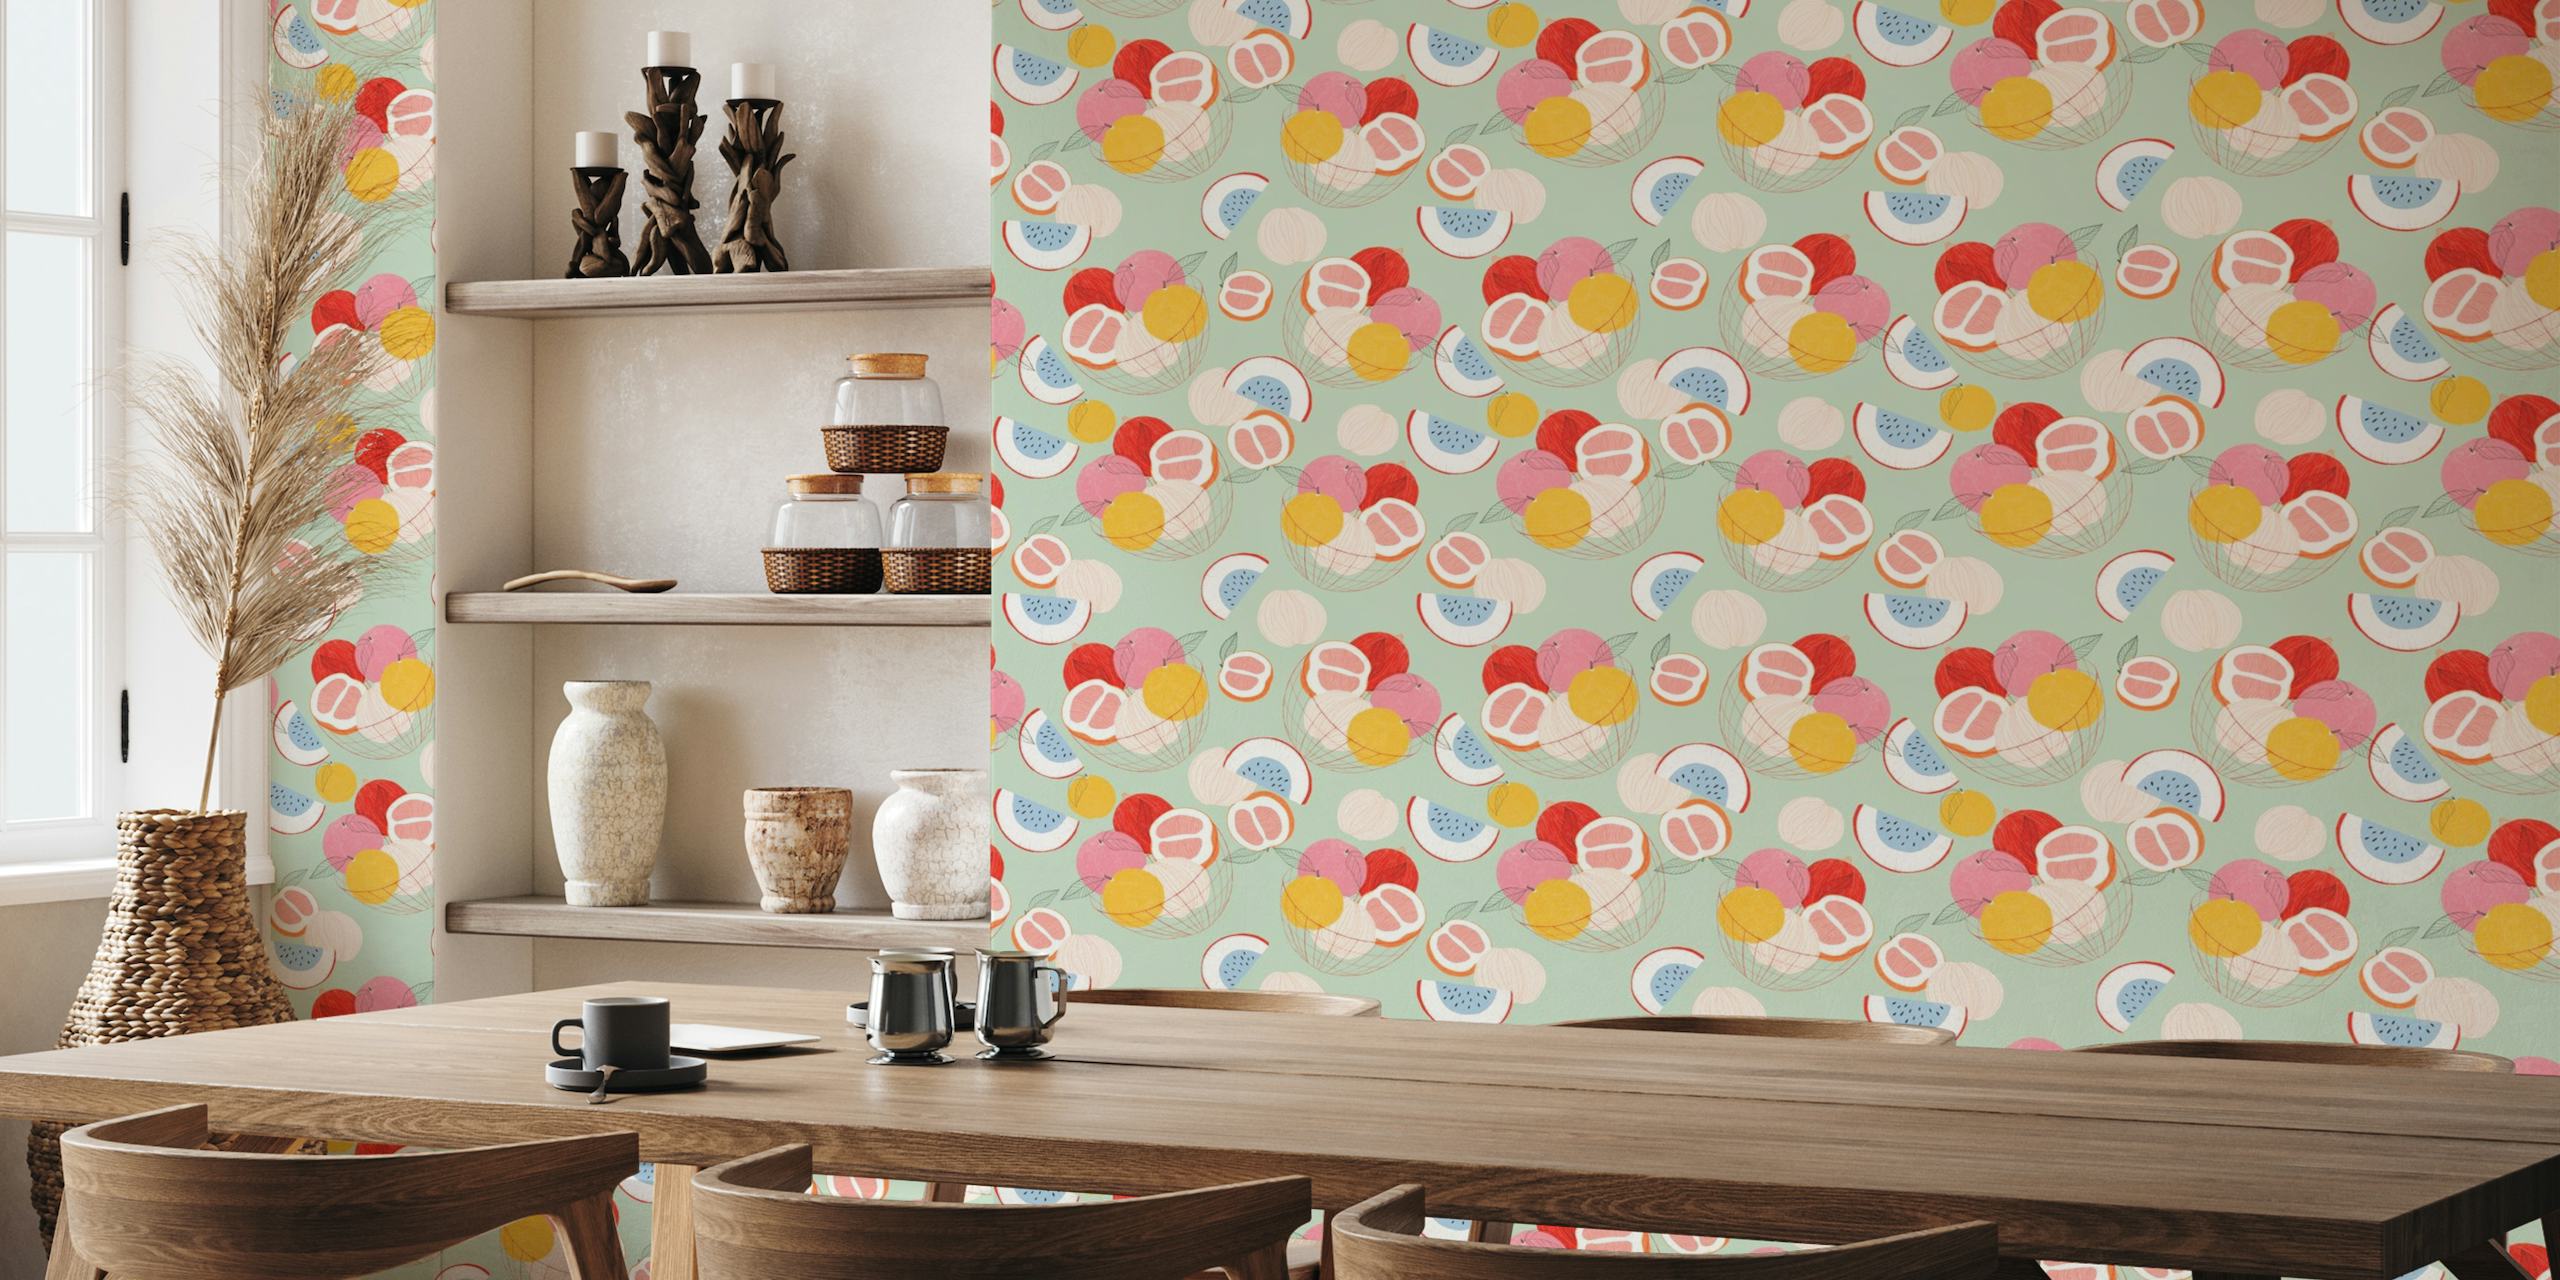 Hand-painted style fruits illustration on pastel background wall mural